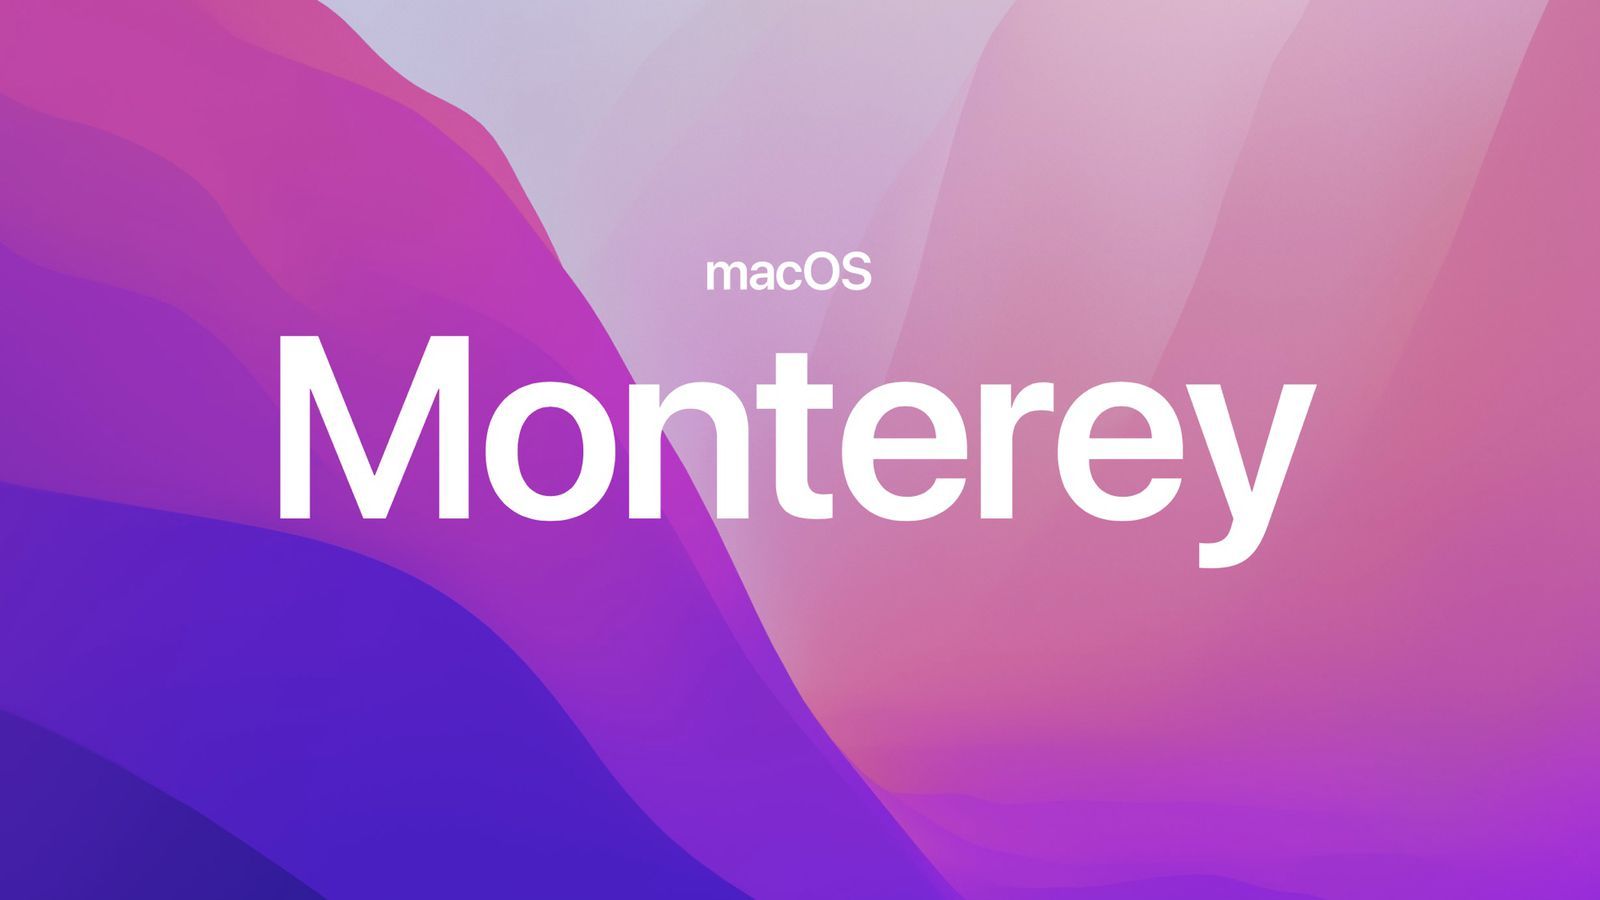 Here Are All the Macs Compatible With macOS Monterey